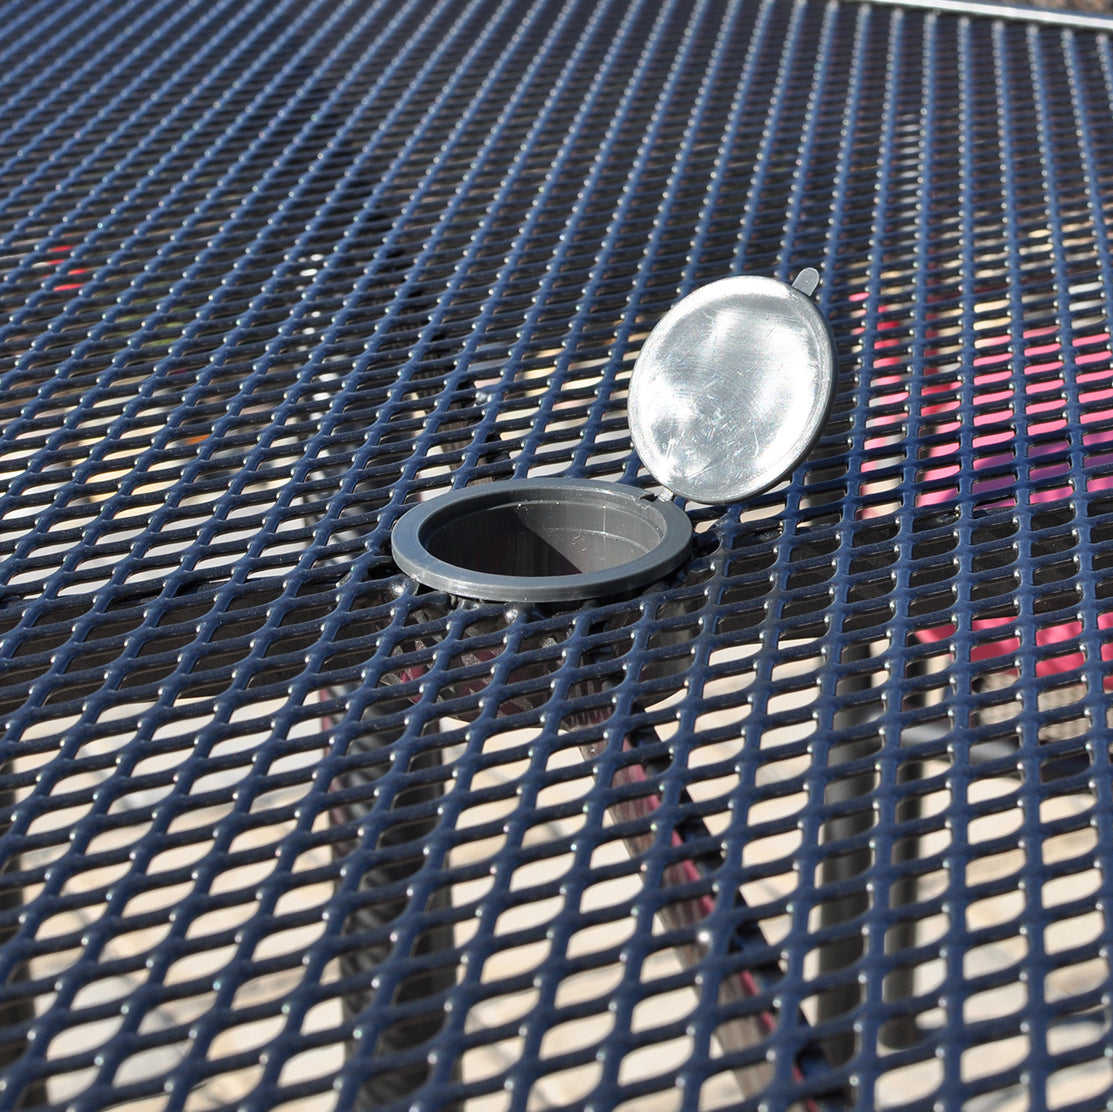 Closeup of umbrella hole and cap on a wrought iron mesh table top.